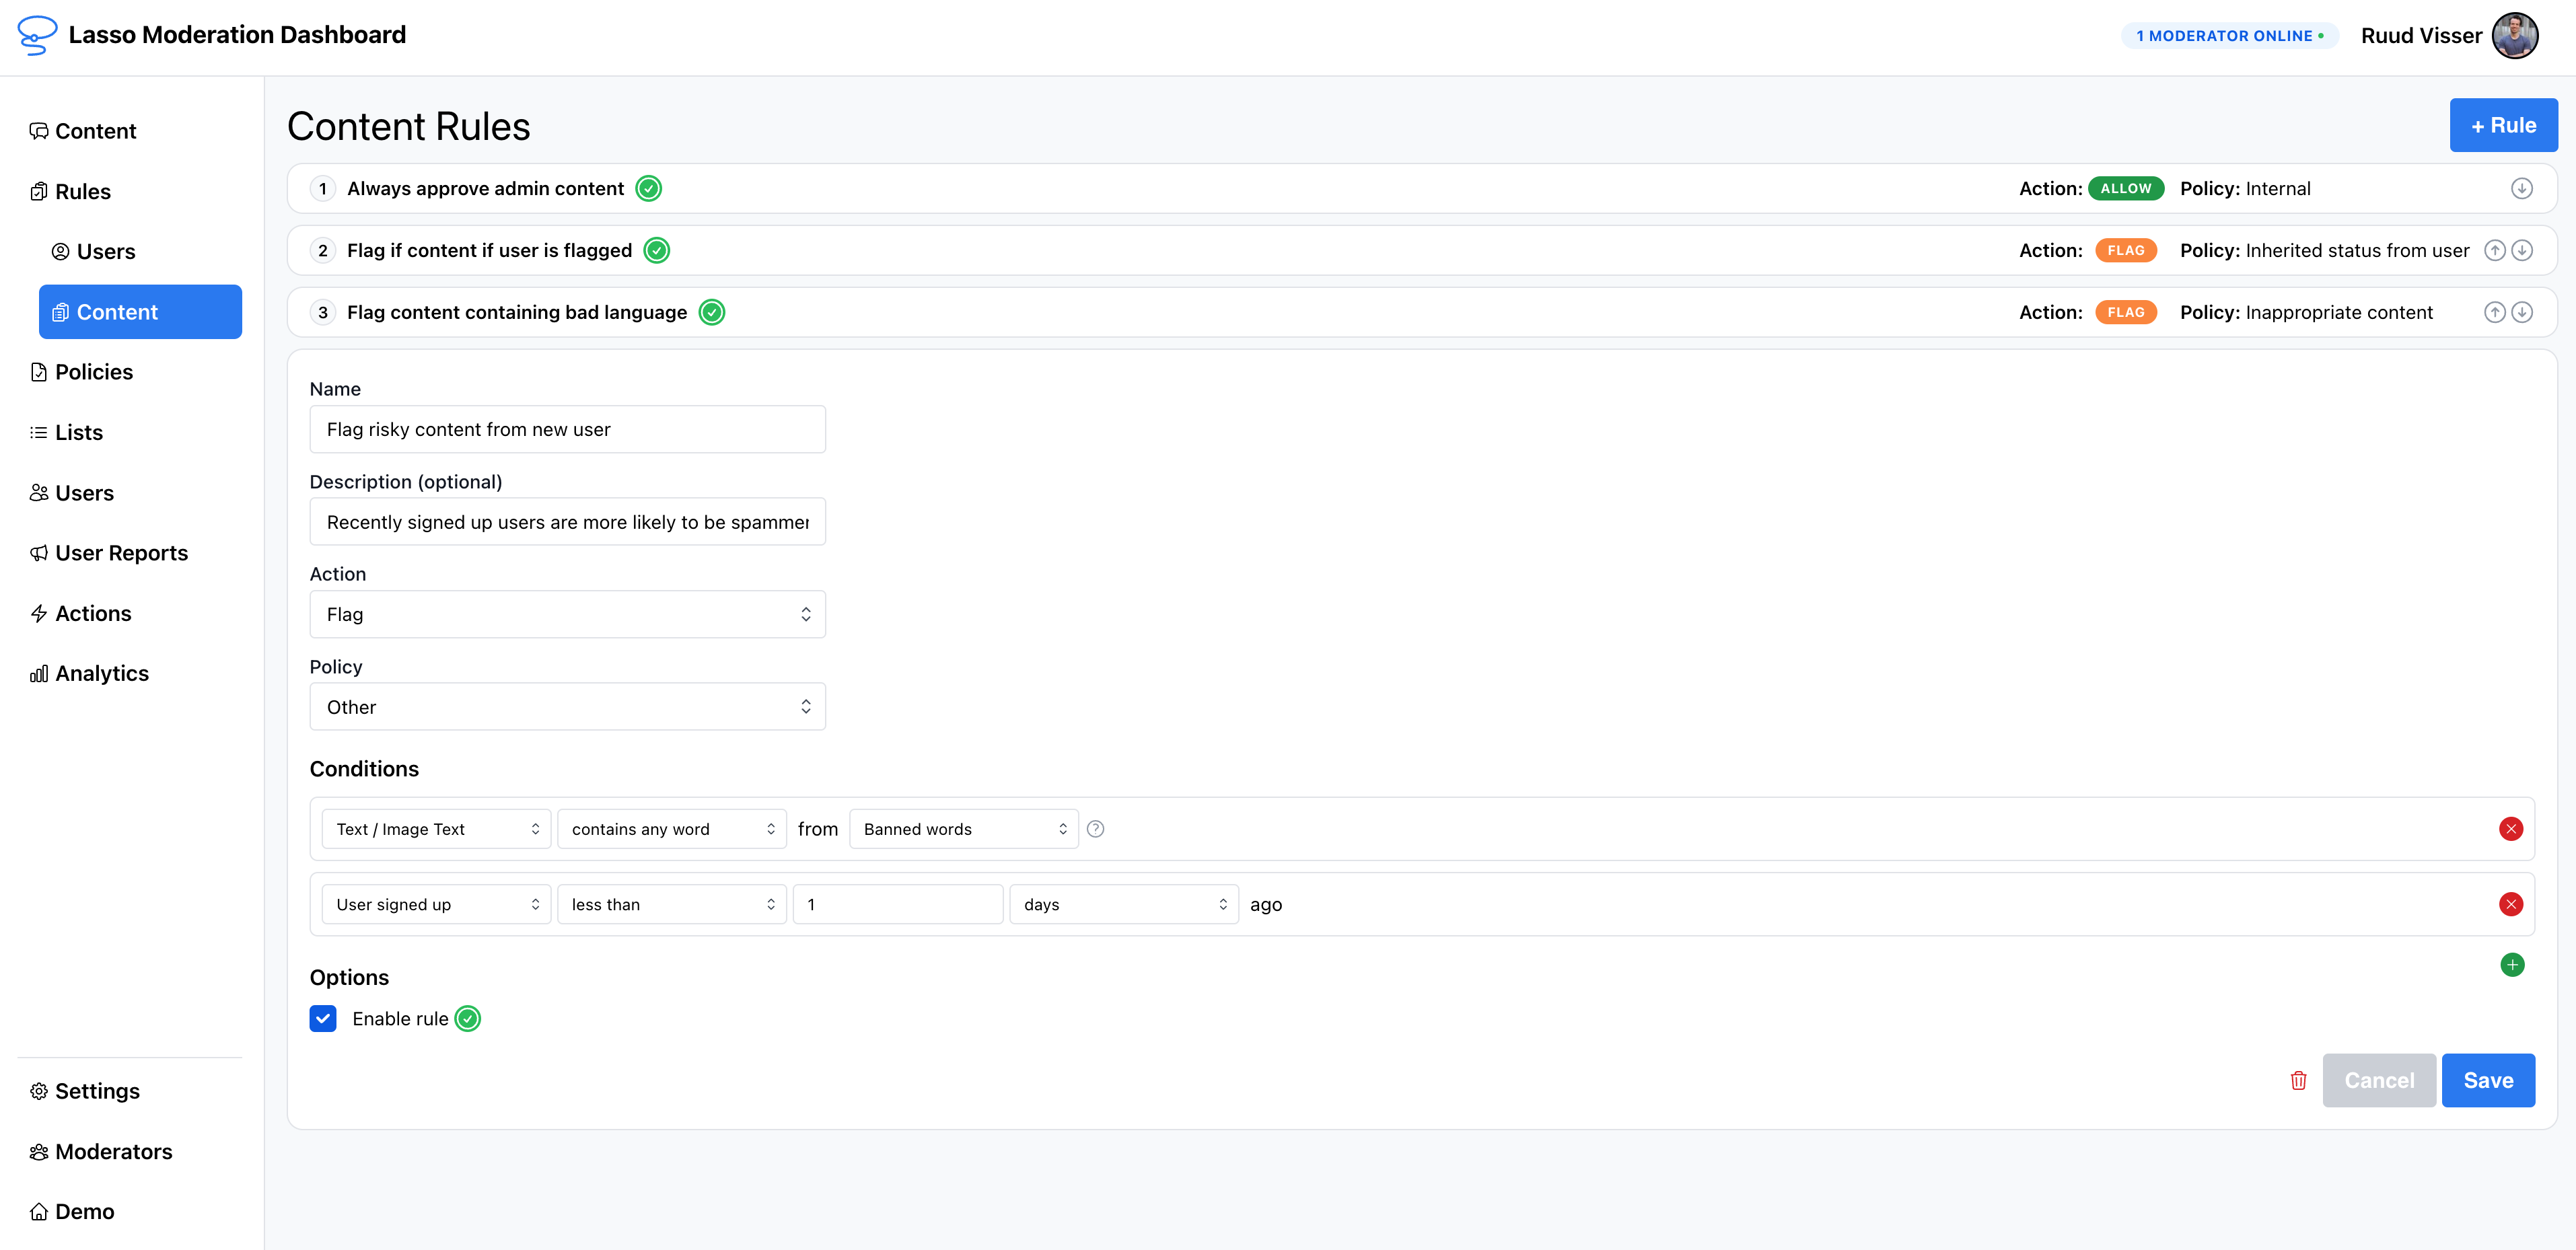 Easily create custom rules to automatically flag or remove content and users. This allows you to customize the platform exactly to your product needs.